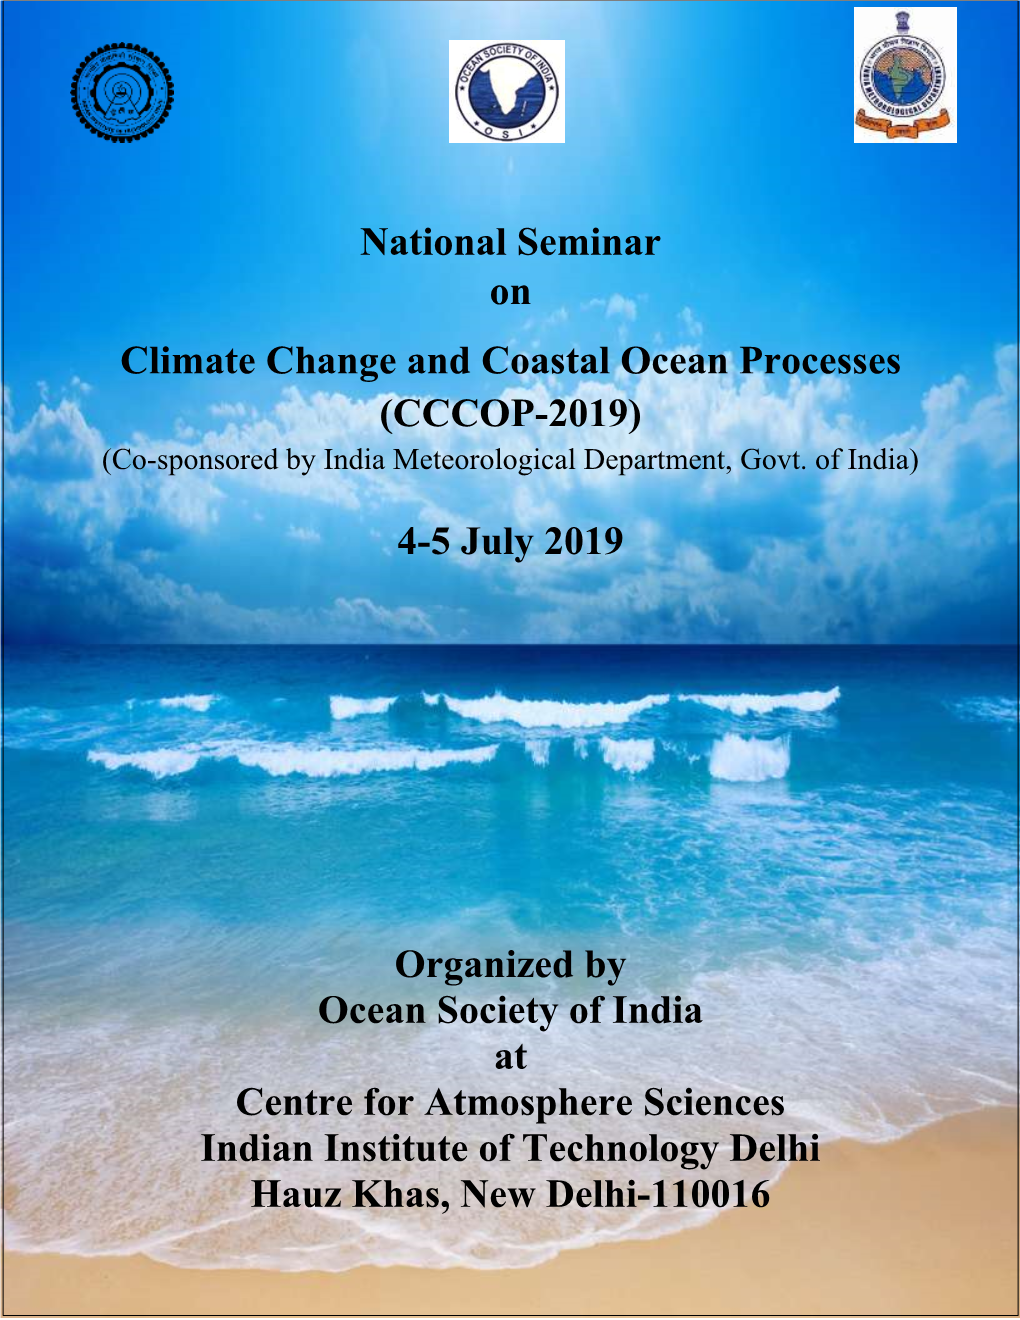 National Seminar on Climate Change and Coastal Ocean Processes (CCCOP-2019) 4-5 July 2019 Organized by Ocean Society of India At